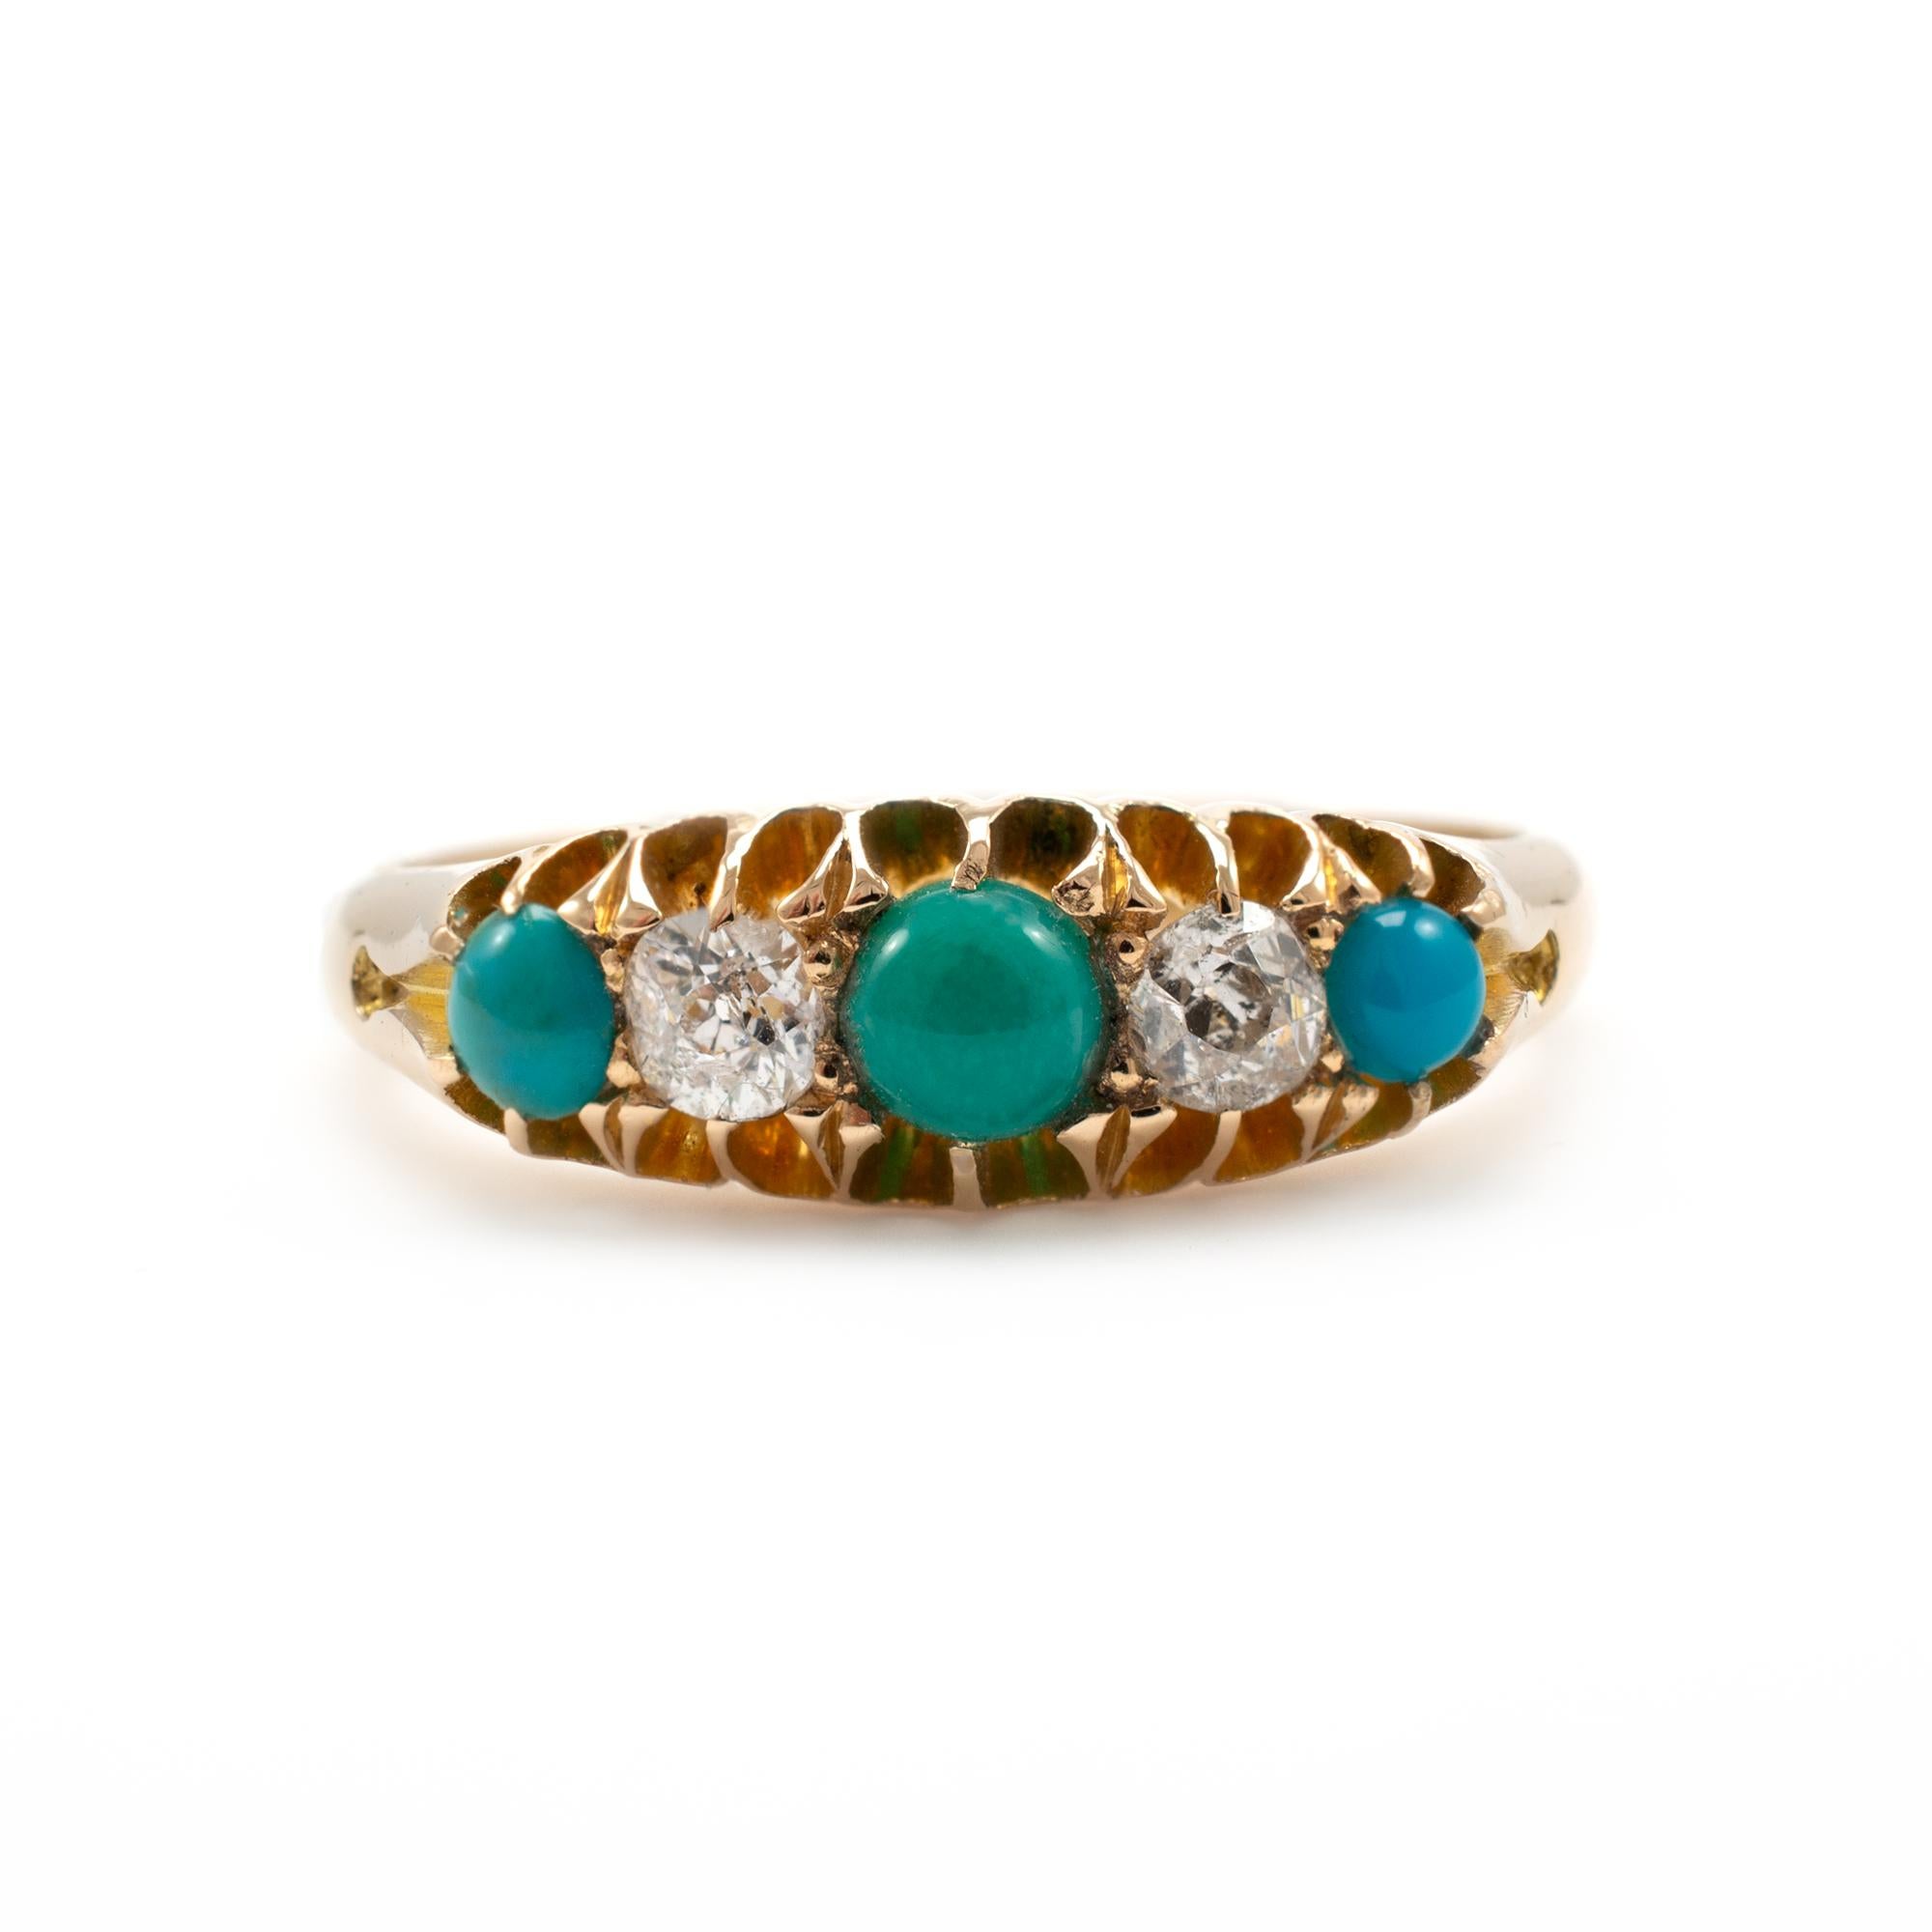 Women's Antique Turquoise and Diamond Boat Shape Ring 18 Karat Yellow Gold, Dated 1893